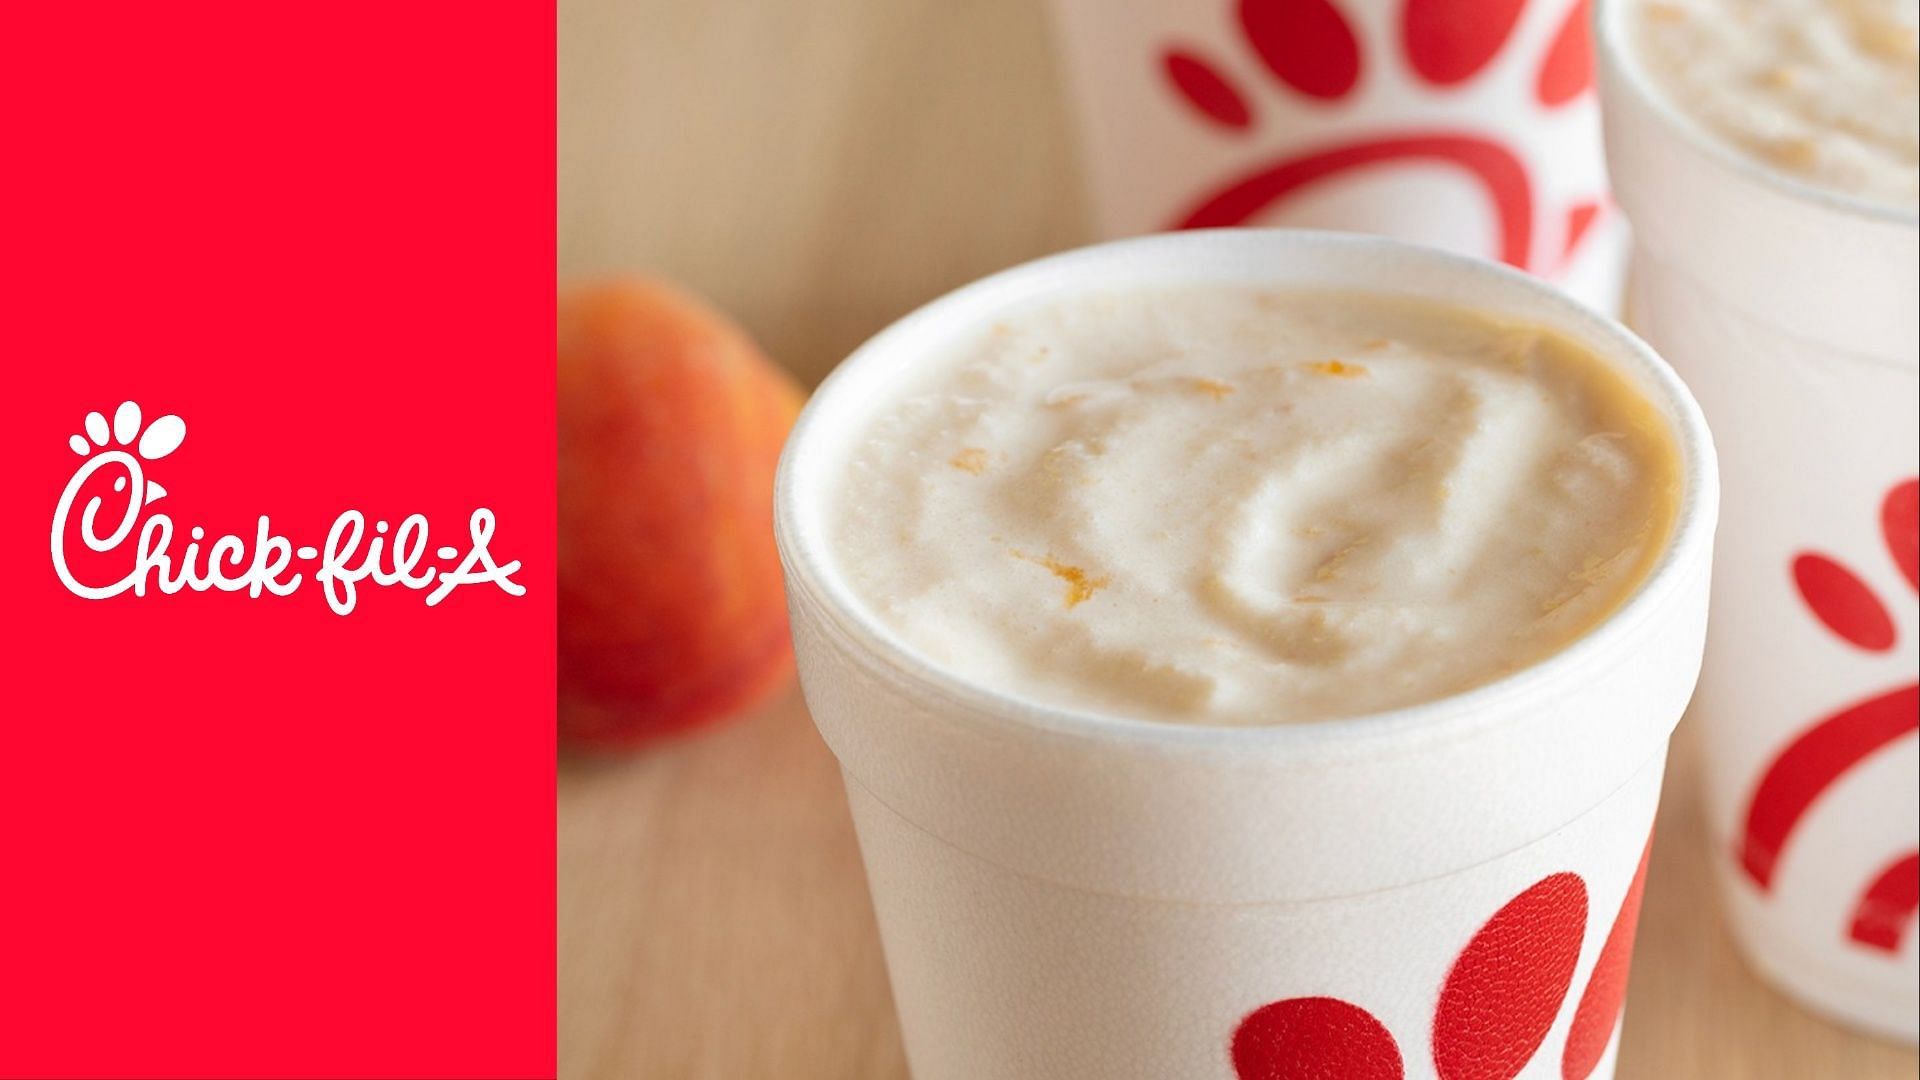 Peach Milkshake is returning to Chick-fil-A this June (Image via Chick-fil-A)